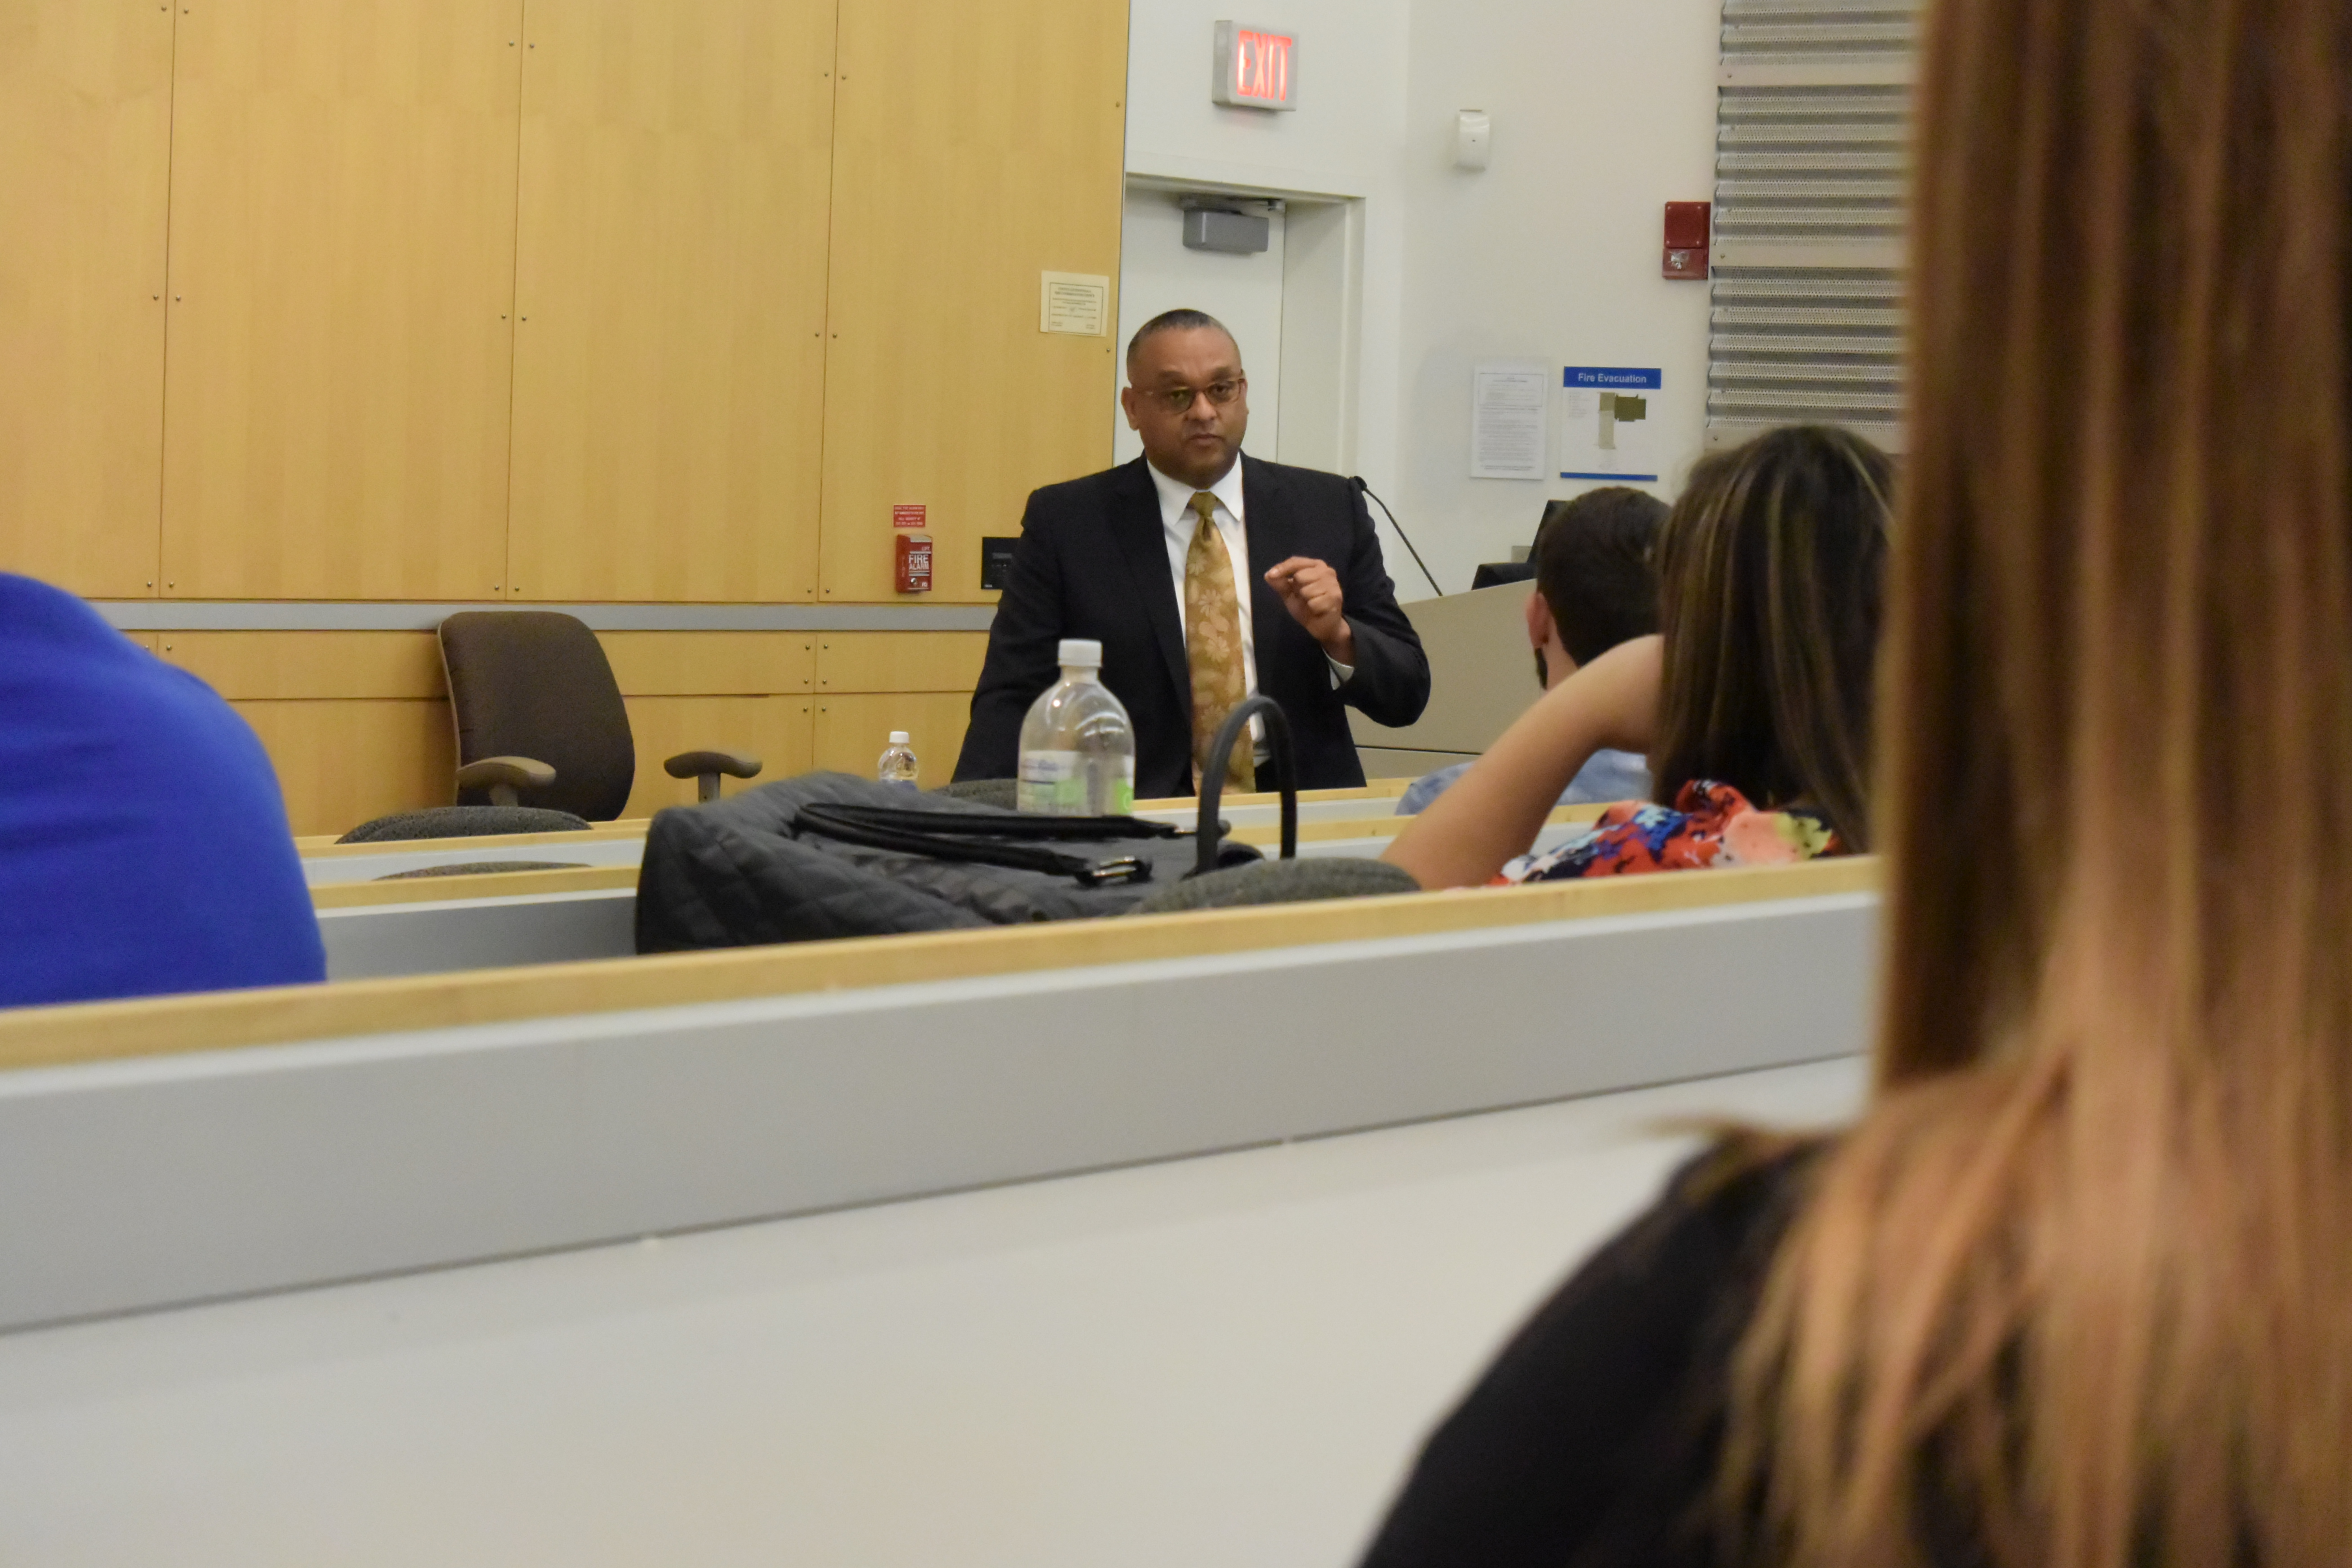 Dr. Daryll Dykes '83 takes questions during his talk with OCC Anatomy and Physiology students.